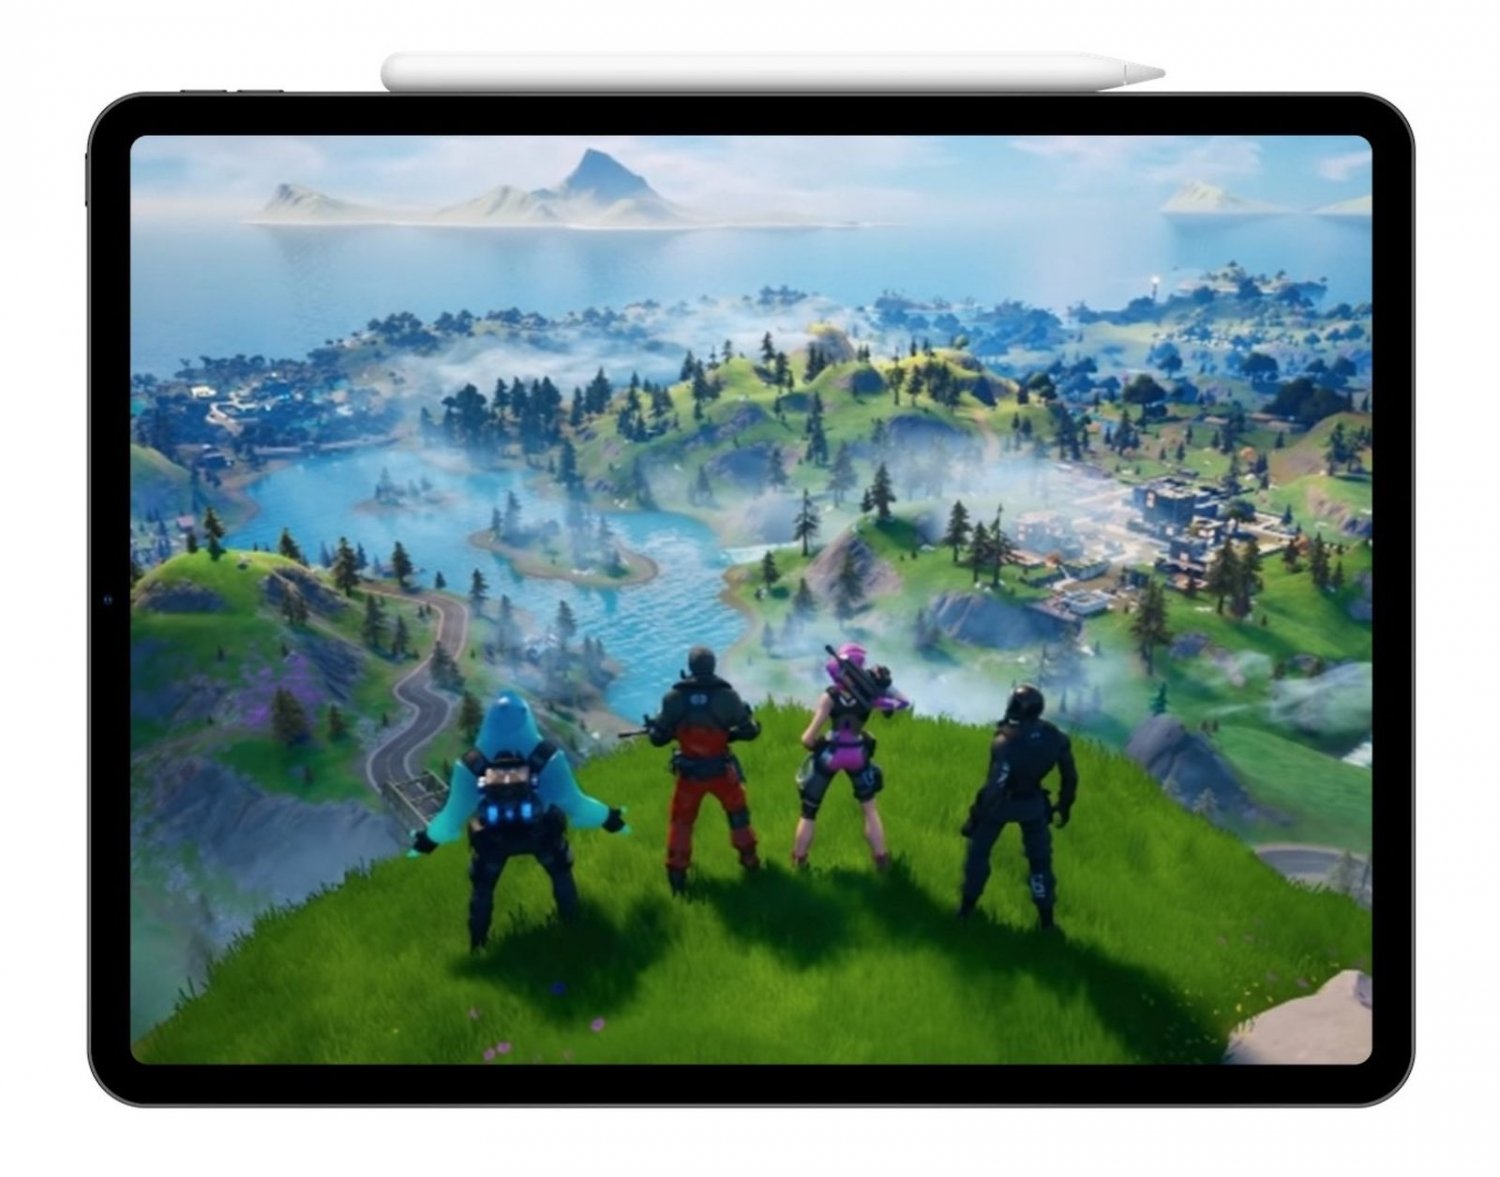 Second Hand Fortnite Game Second Hand Ipad 7 With Fortnite Pre Installed On Ebay For 900 Tweaktown